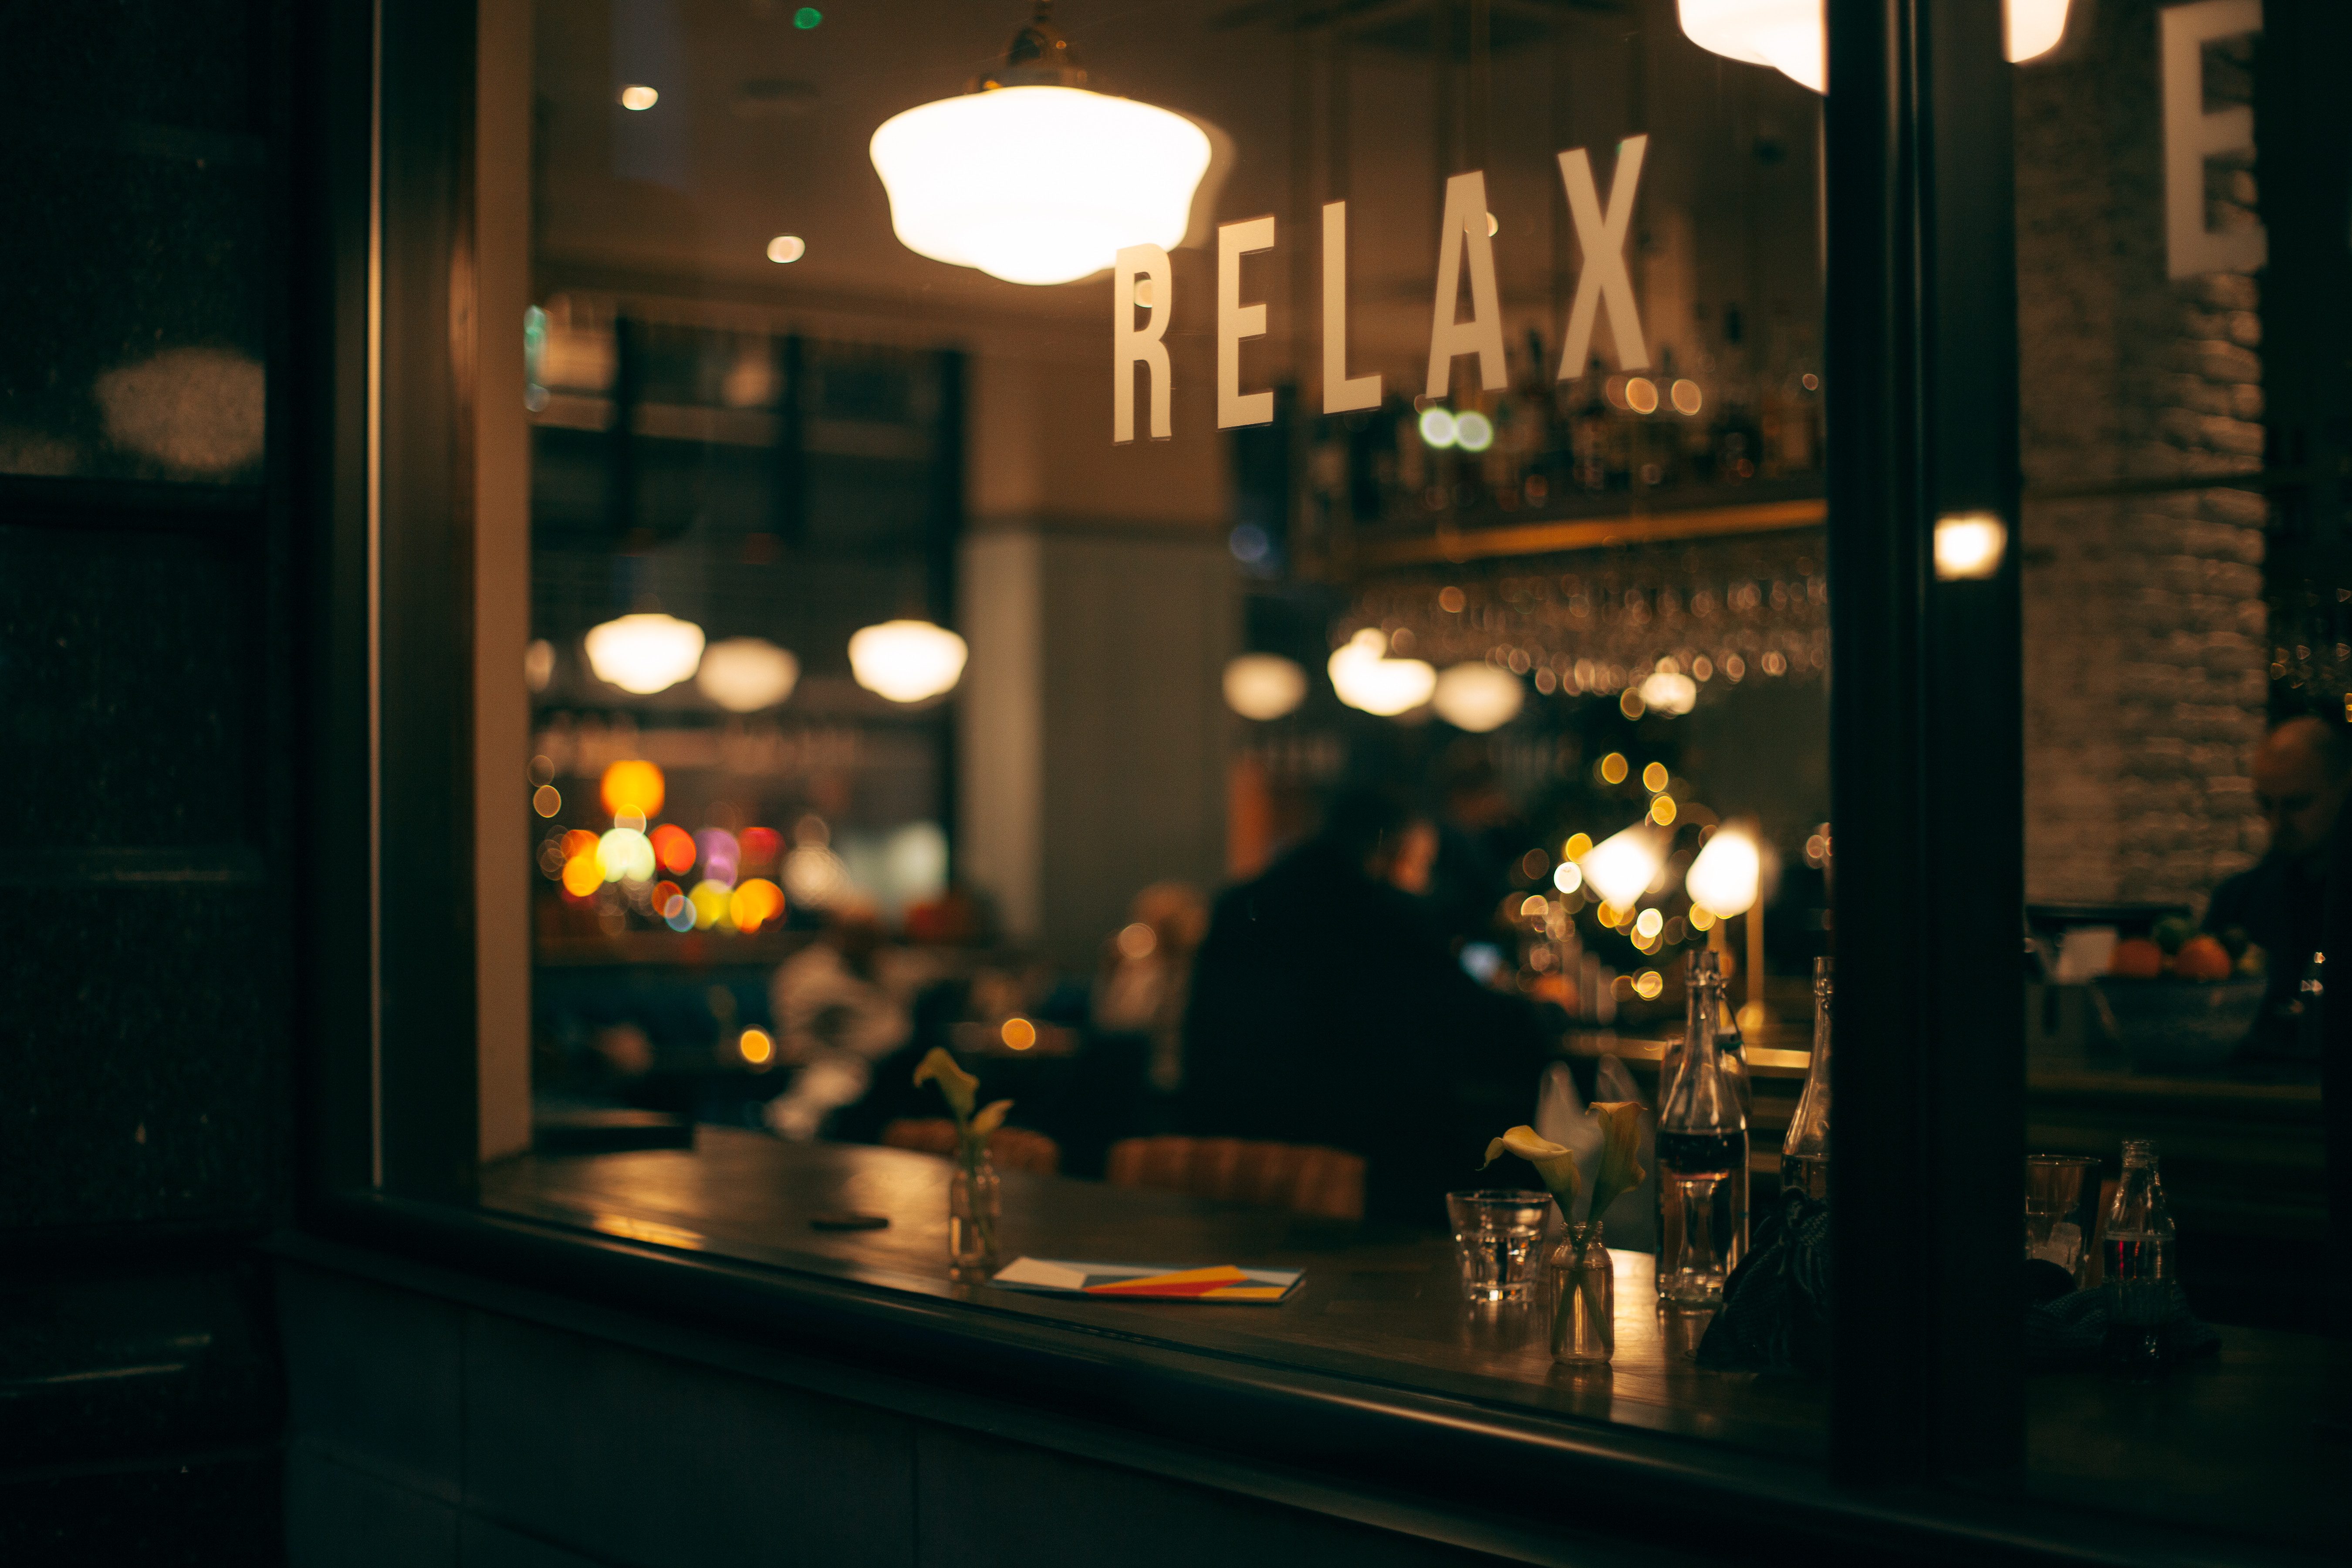 Relax sign in a shop window. Photo by Clem Onojeghuo on Unsplash